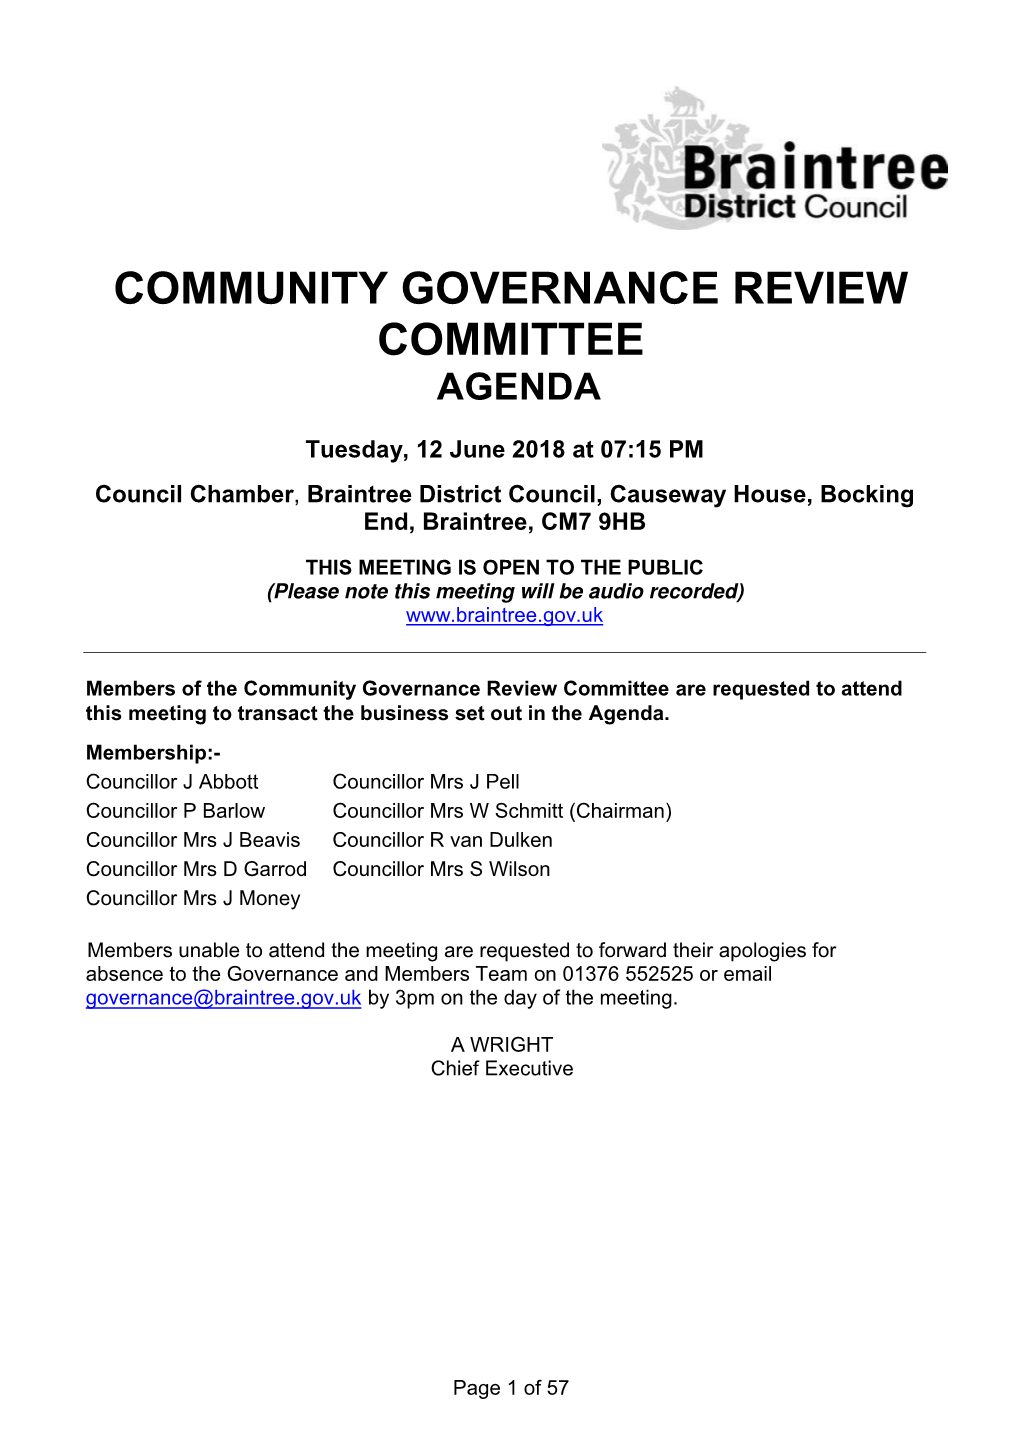 Community Governance Review Committee Agenda